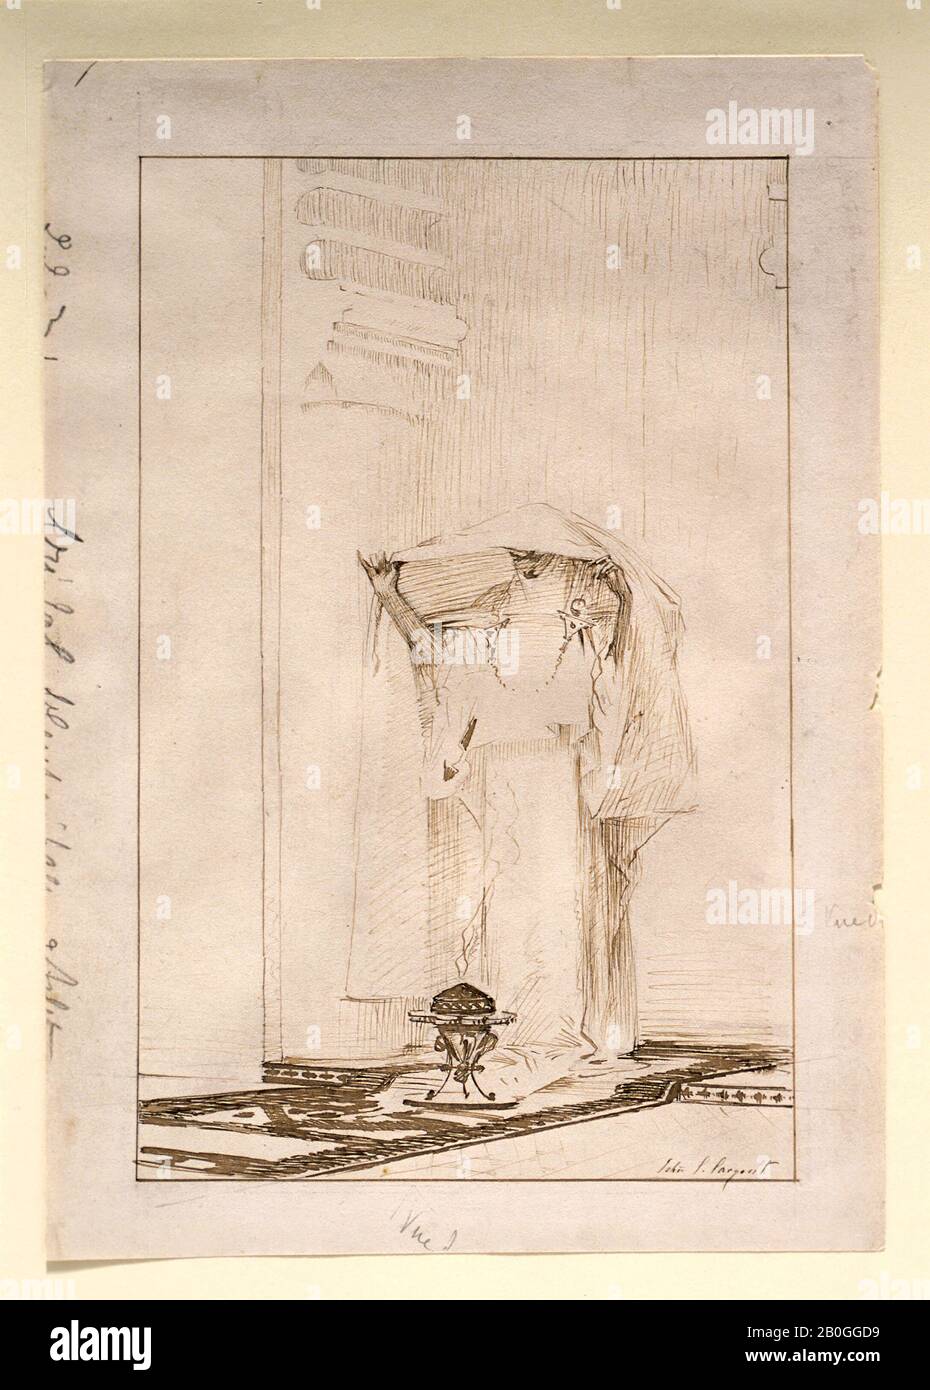 John Singer Sargent, American, 1856–1925, Sketch after 'Fumée d'ambre-gris', 1880, Pen and black ink on paper, Overall: 11 5/16 x 7 13/16 in. (28.8 x 19.9 cm Stock Photo